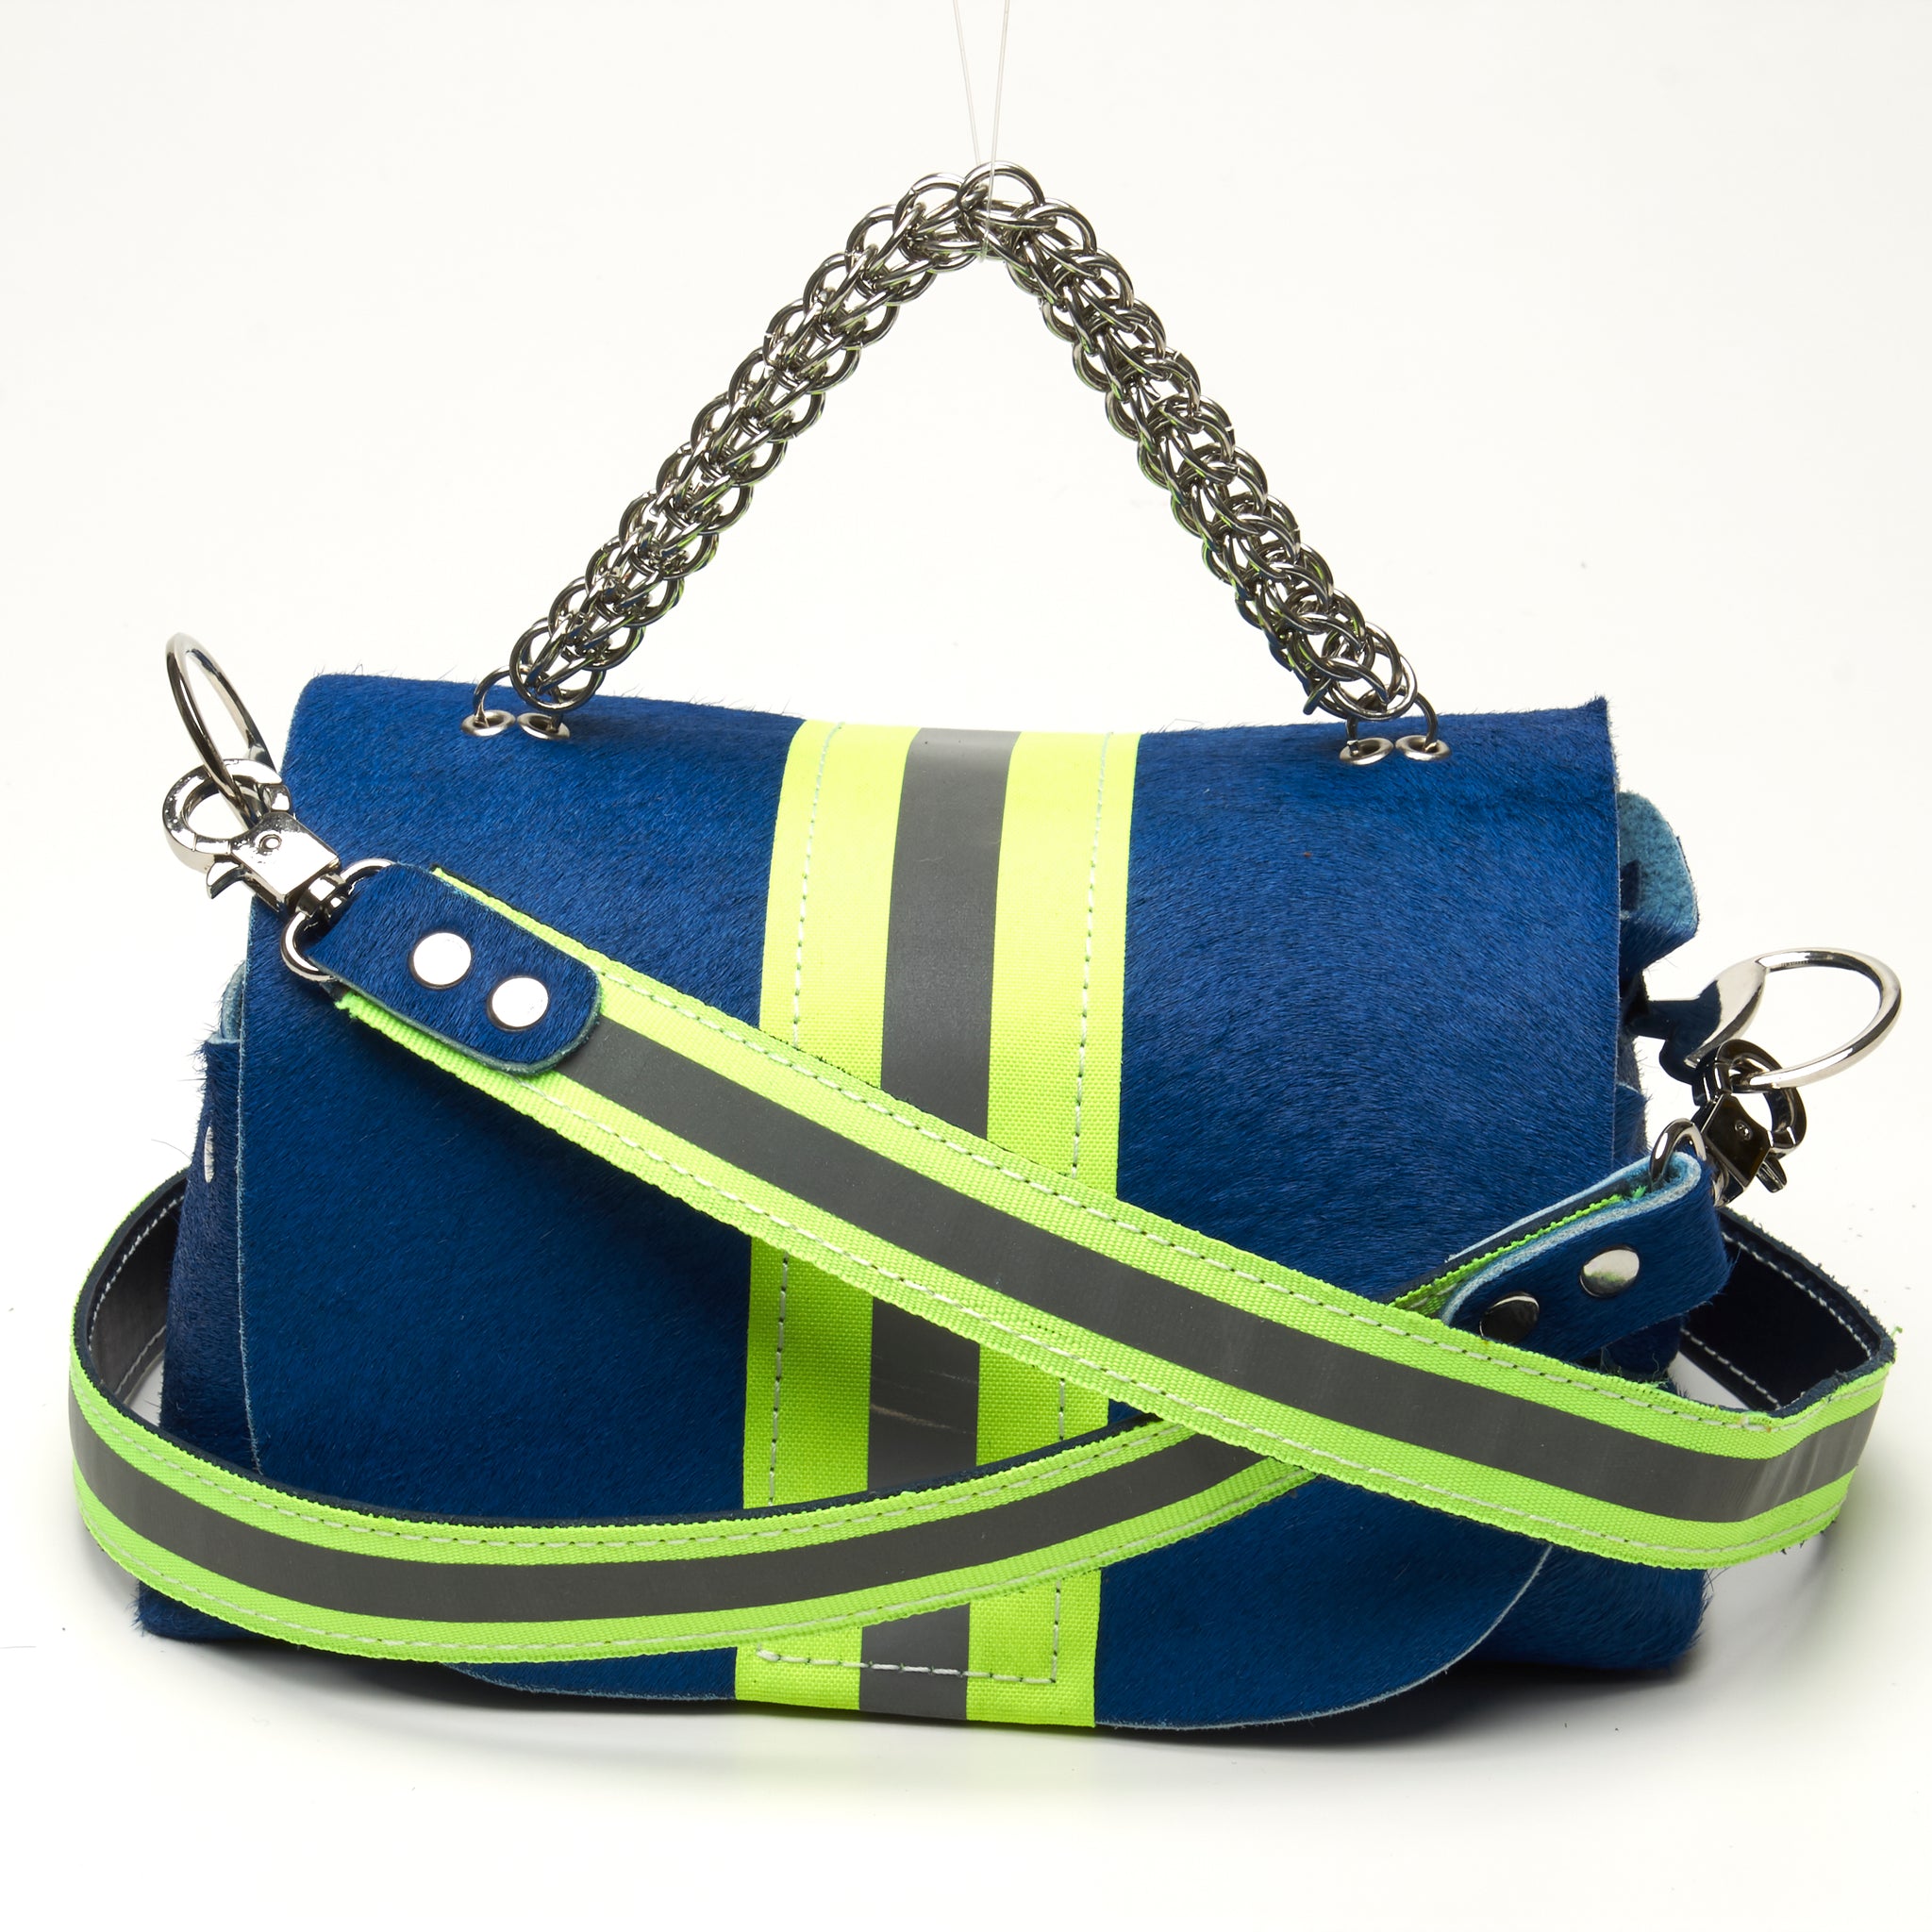 HAIR-ON COWHIDE LEATHER WITH WIDE NEON YELLOW REFLECTIVE TRIM. By NYET Jewelry.